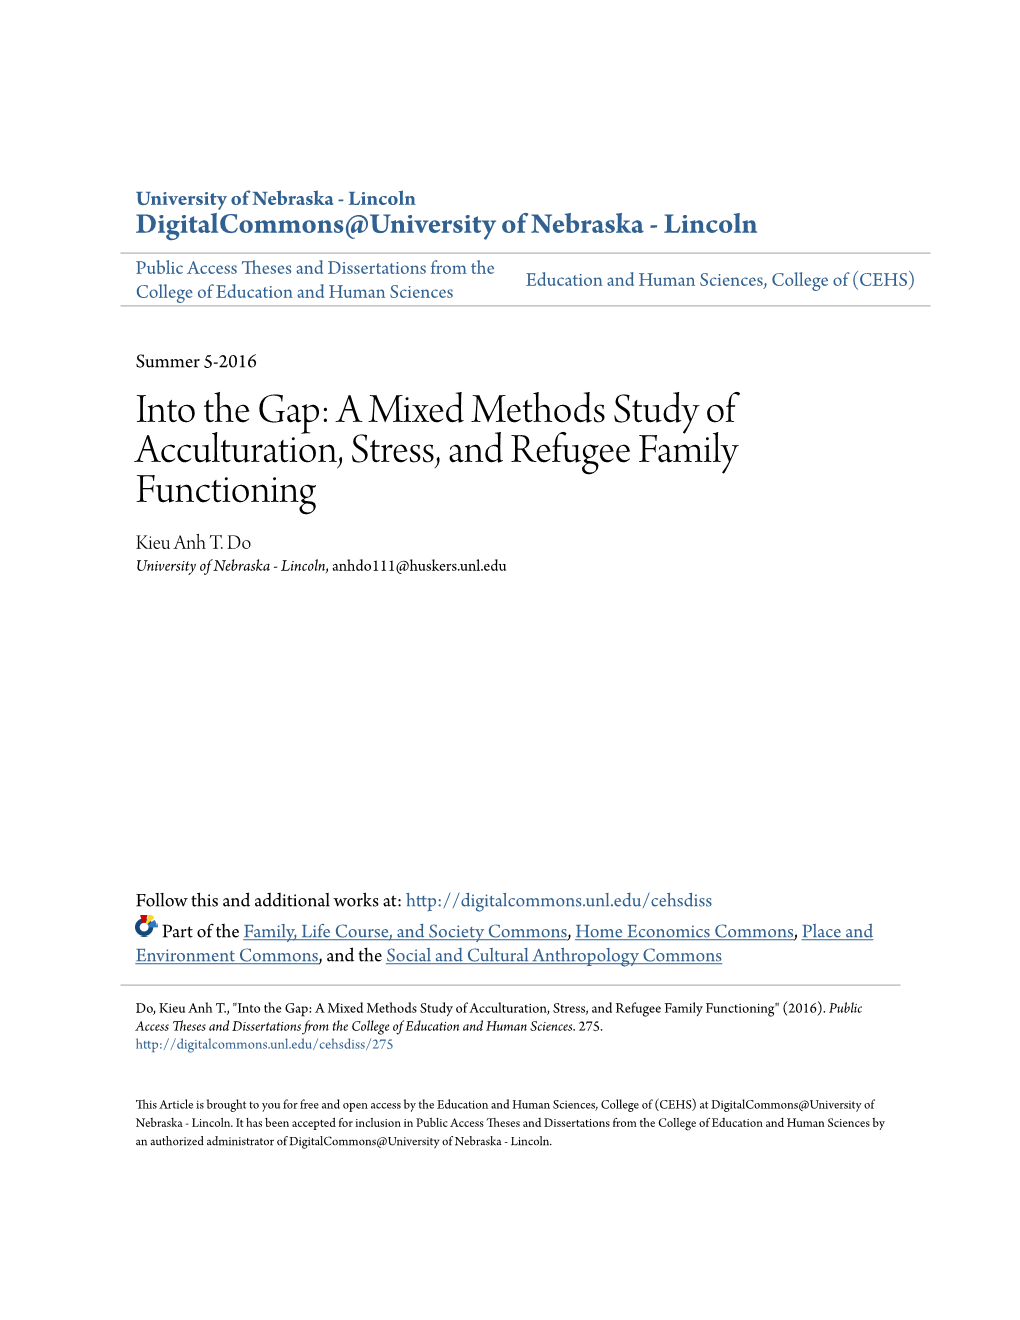 A Mixed Methods Study of Acculturation, Stress, and Refugee Family Functioning Kieu Anh T